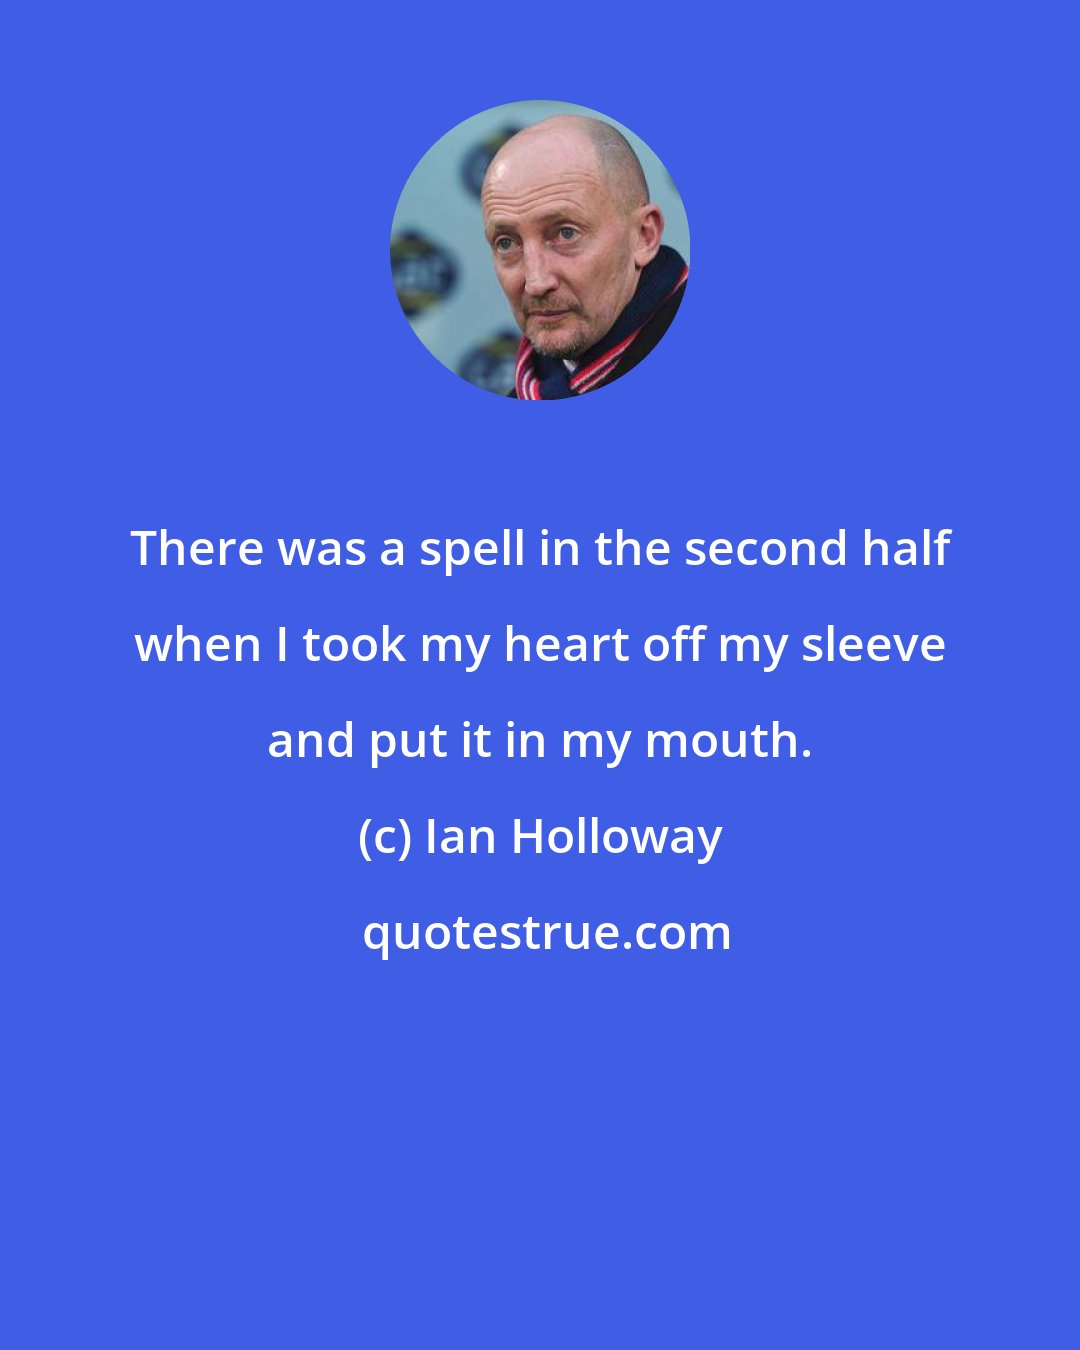 Ian Holloway: There was a spell in the second half when I took my heart off my sleeve and put it in my mouth.